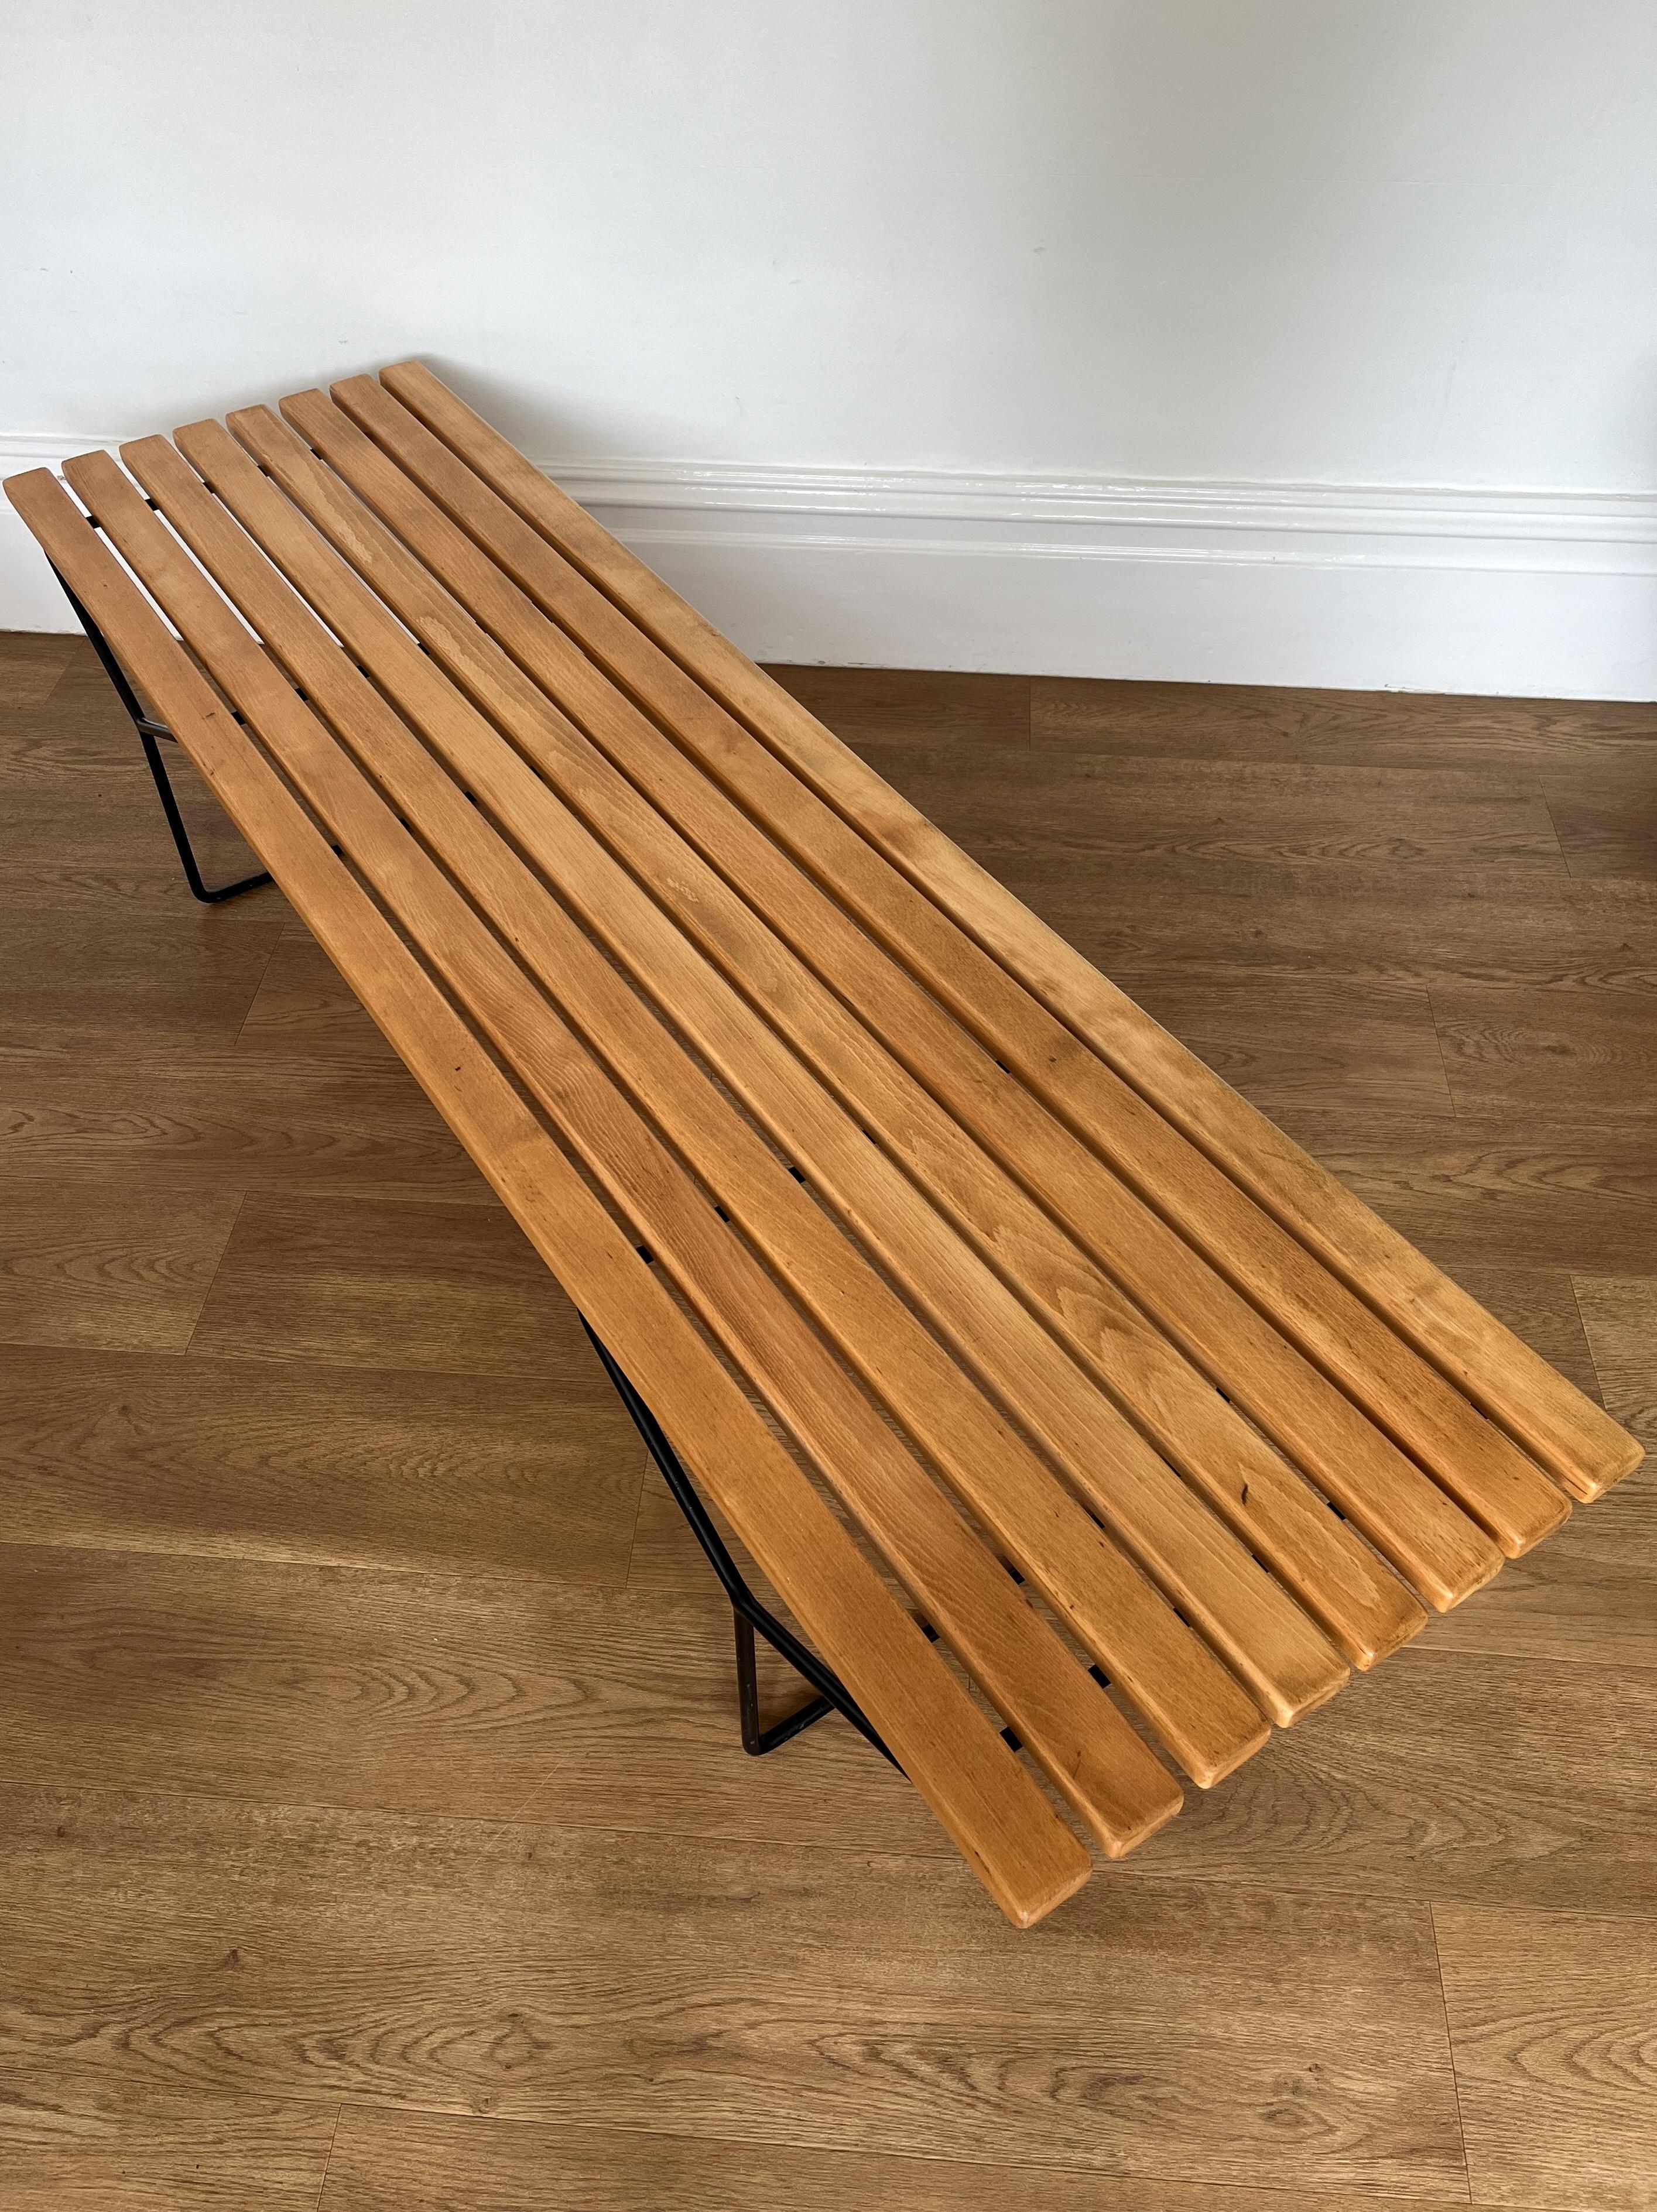 Model 400 Beech bench / coffee table originally designed by Harry Bertoia in 1952.

This bench dates to 1970 (we have the original receipt from Heals dated 16/7/70).

The slats have been professionally (and sympathetically) restored (cleaned and